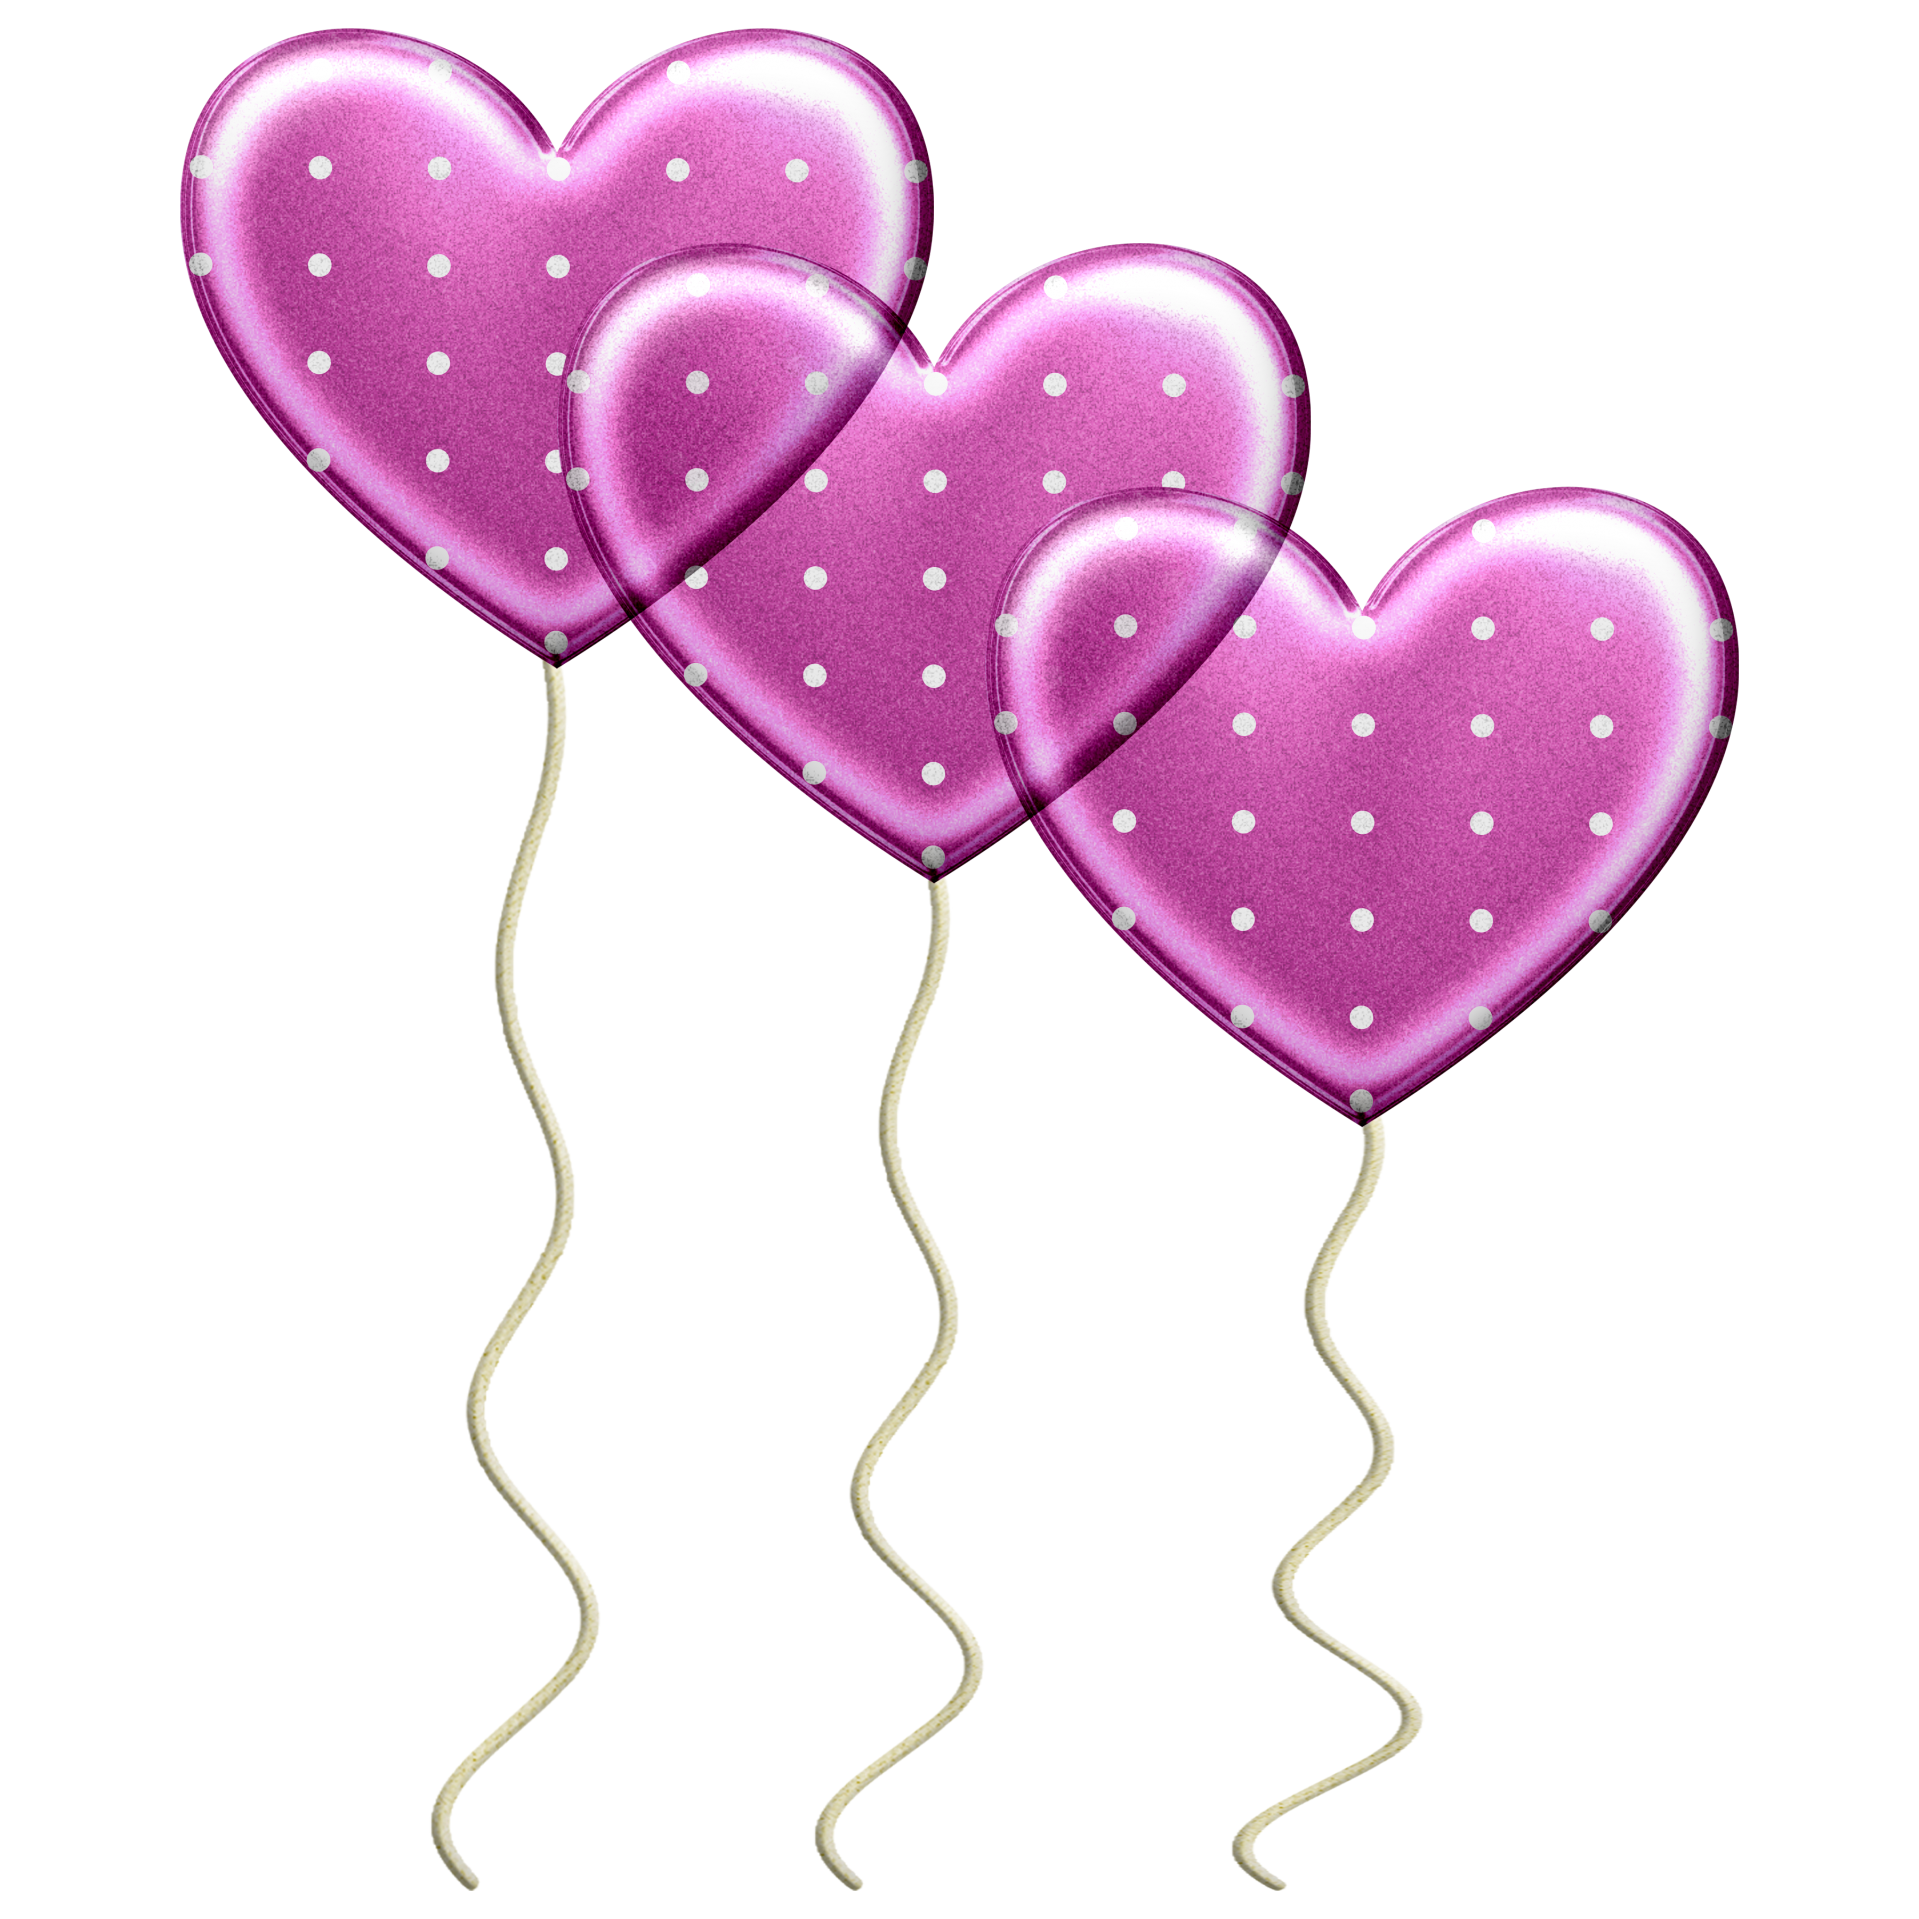 Heart Shaped Balloons - Pink Patterned Mylar